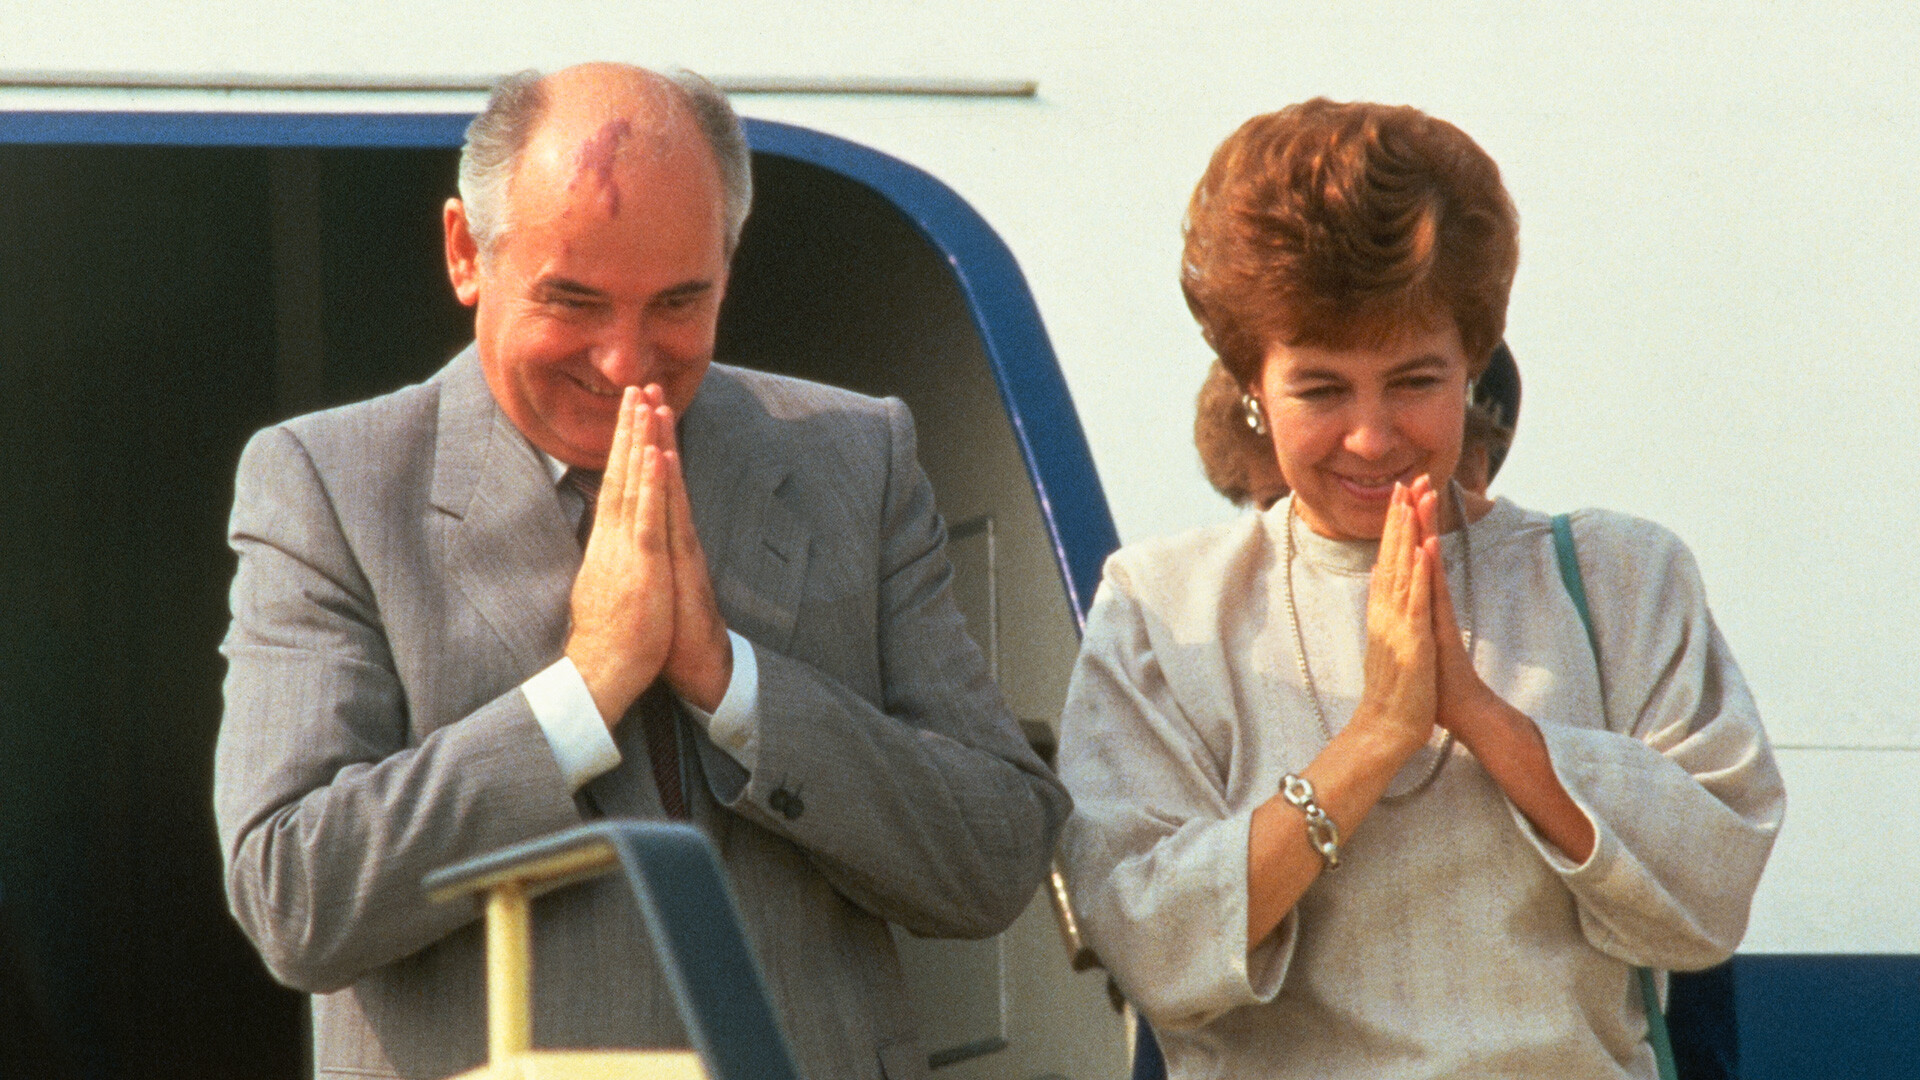 Mikhail Gorbachev and his wife Raisa disembarking a plane in New Delhi for a state visit. 